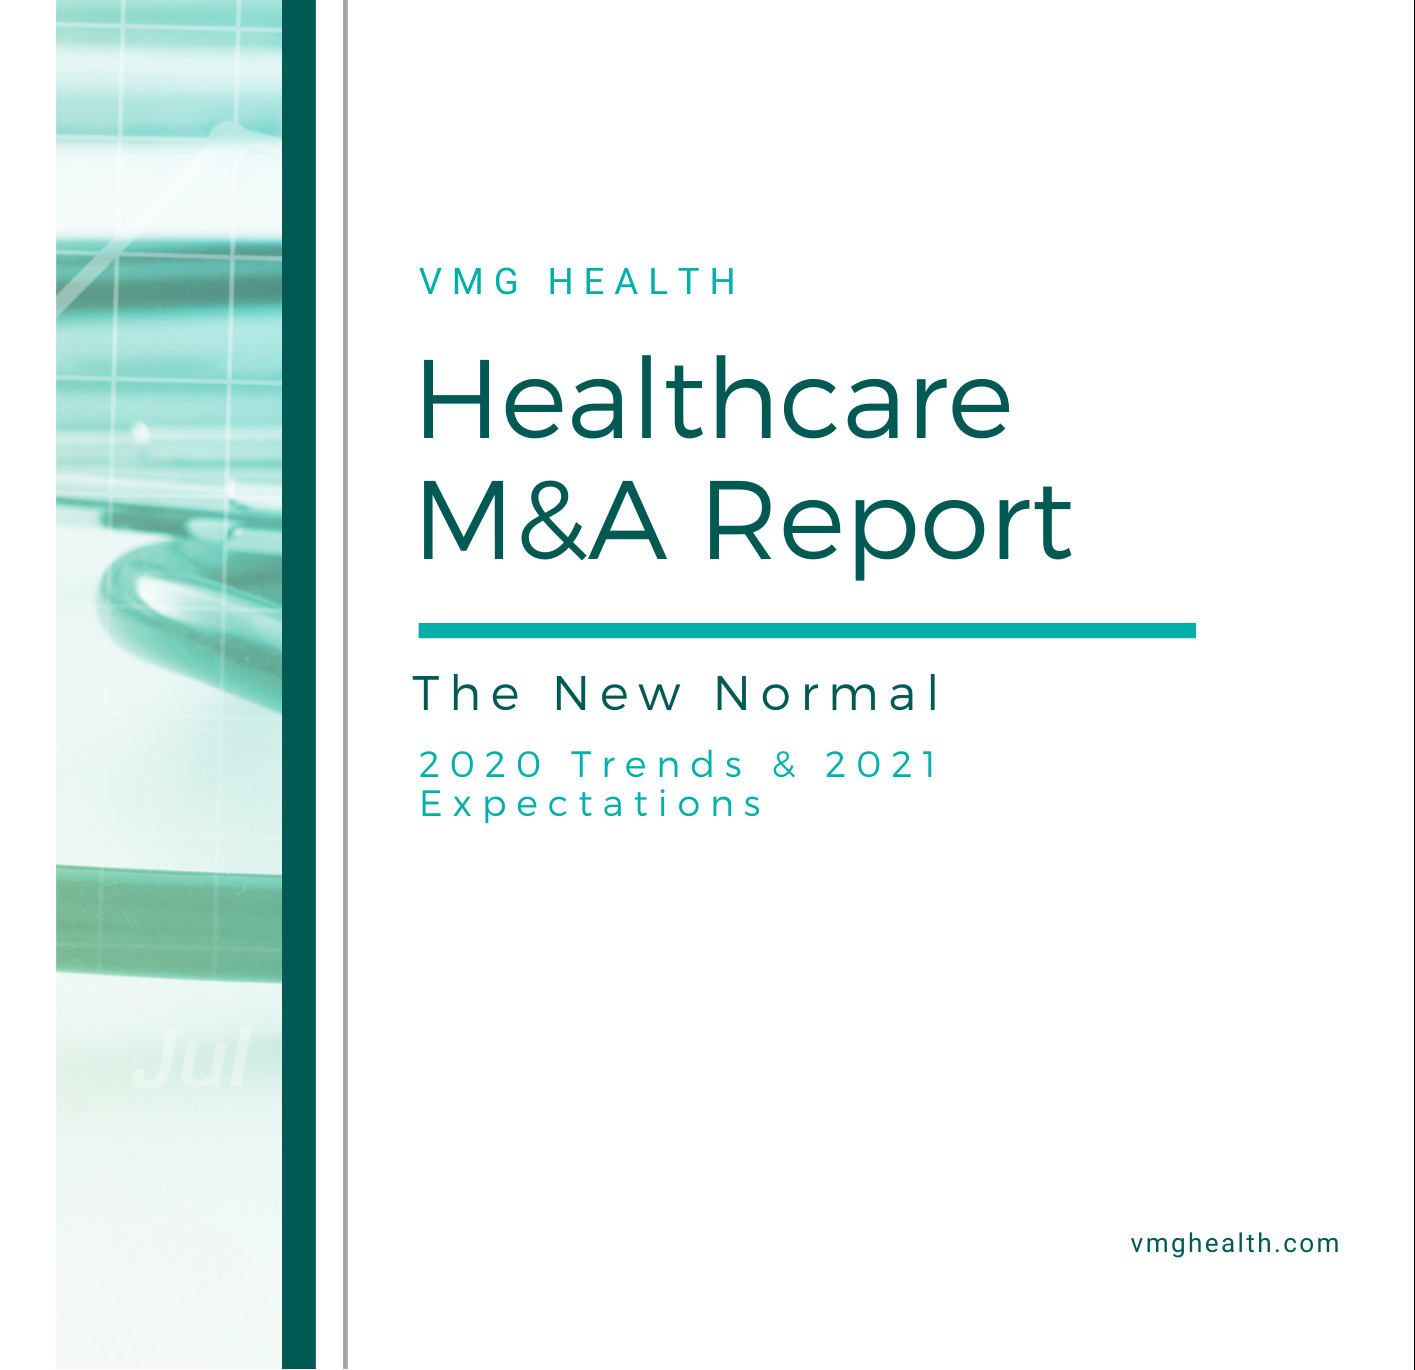 Healthcare M&A Report: The New Normal – 2020 Trends & 2021 Expectations